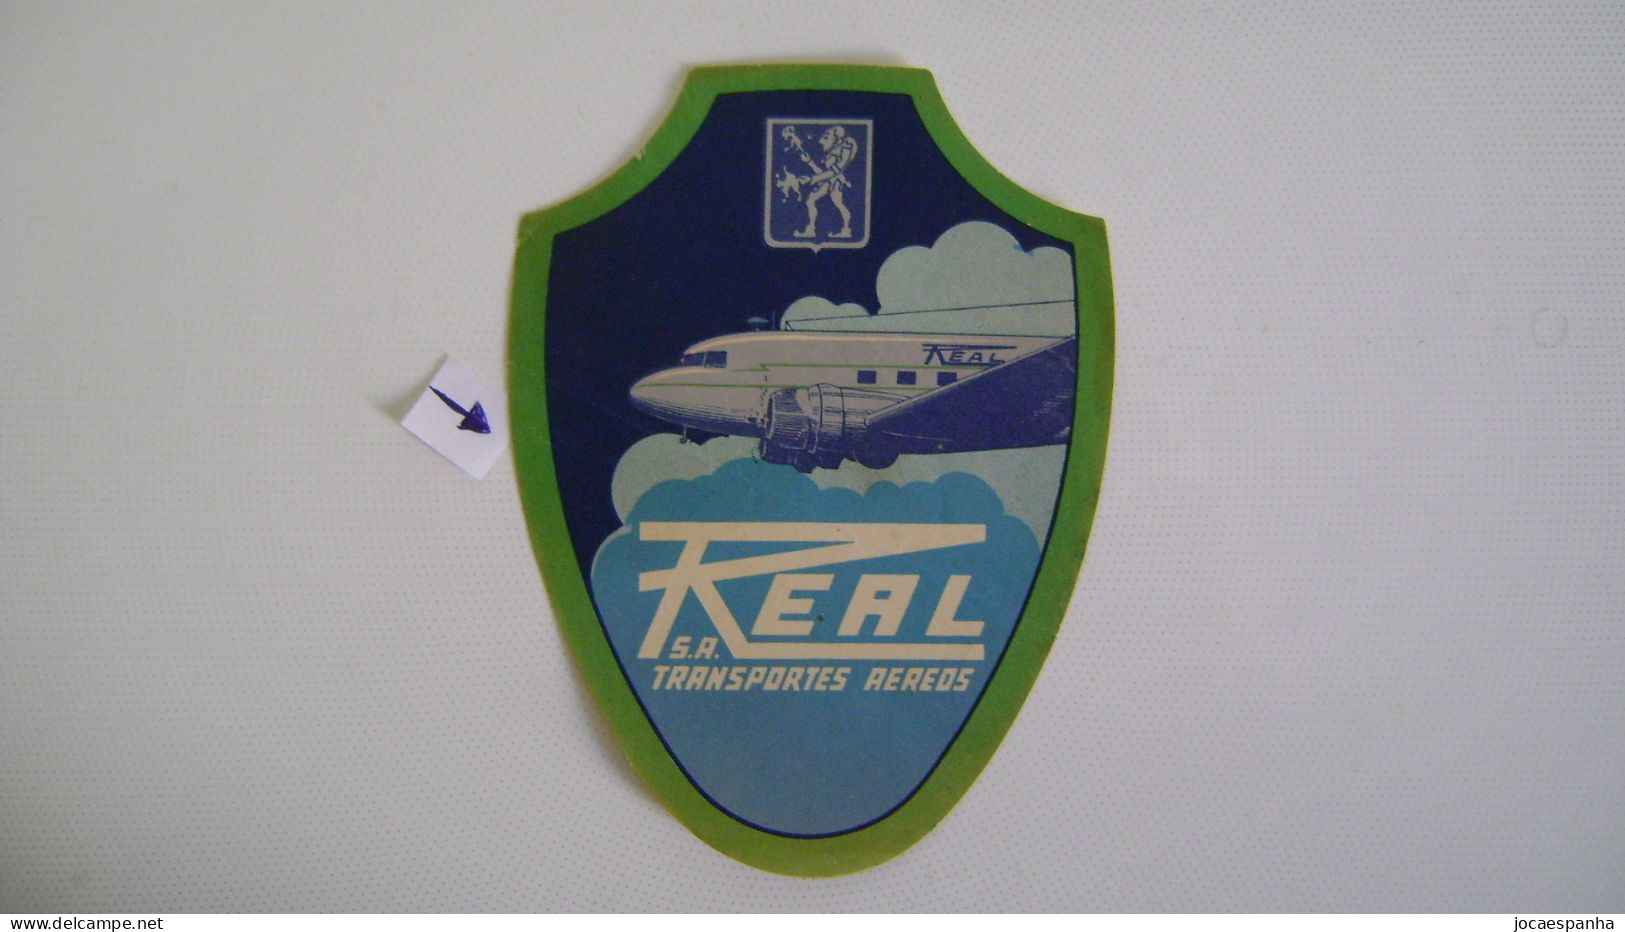 BRAZIL / BRASIL - LABEL OF THE REAL TRANSPORTES AEREOS AIRLINE COMPANY IN THE STATE - Werbung